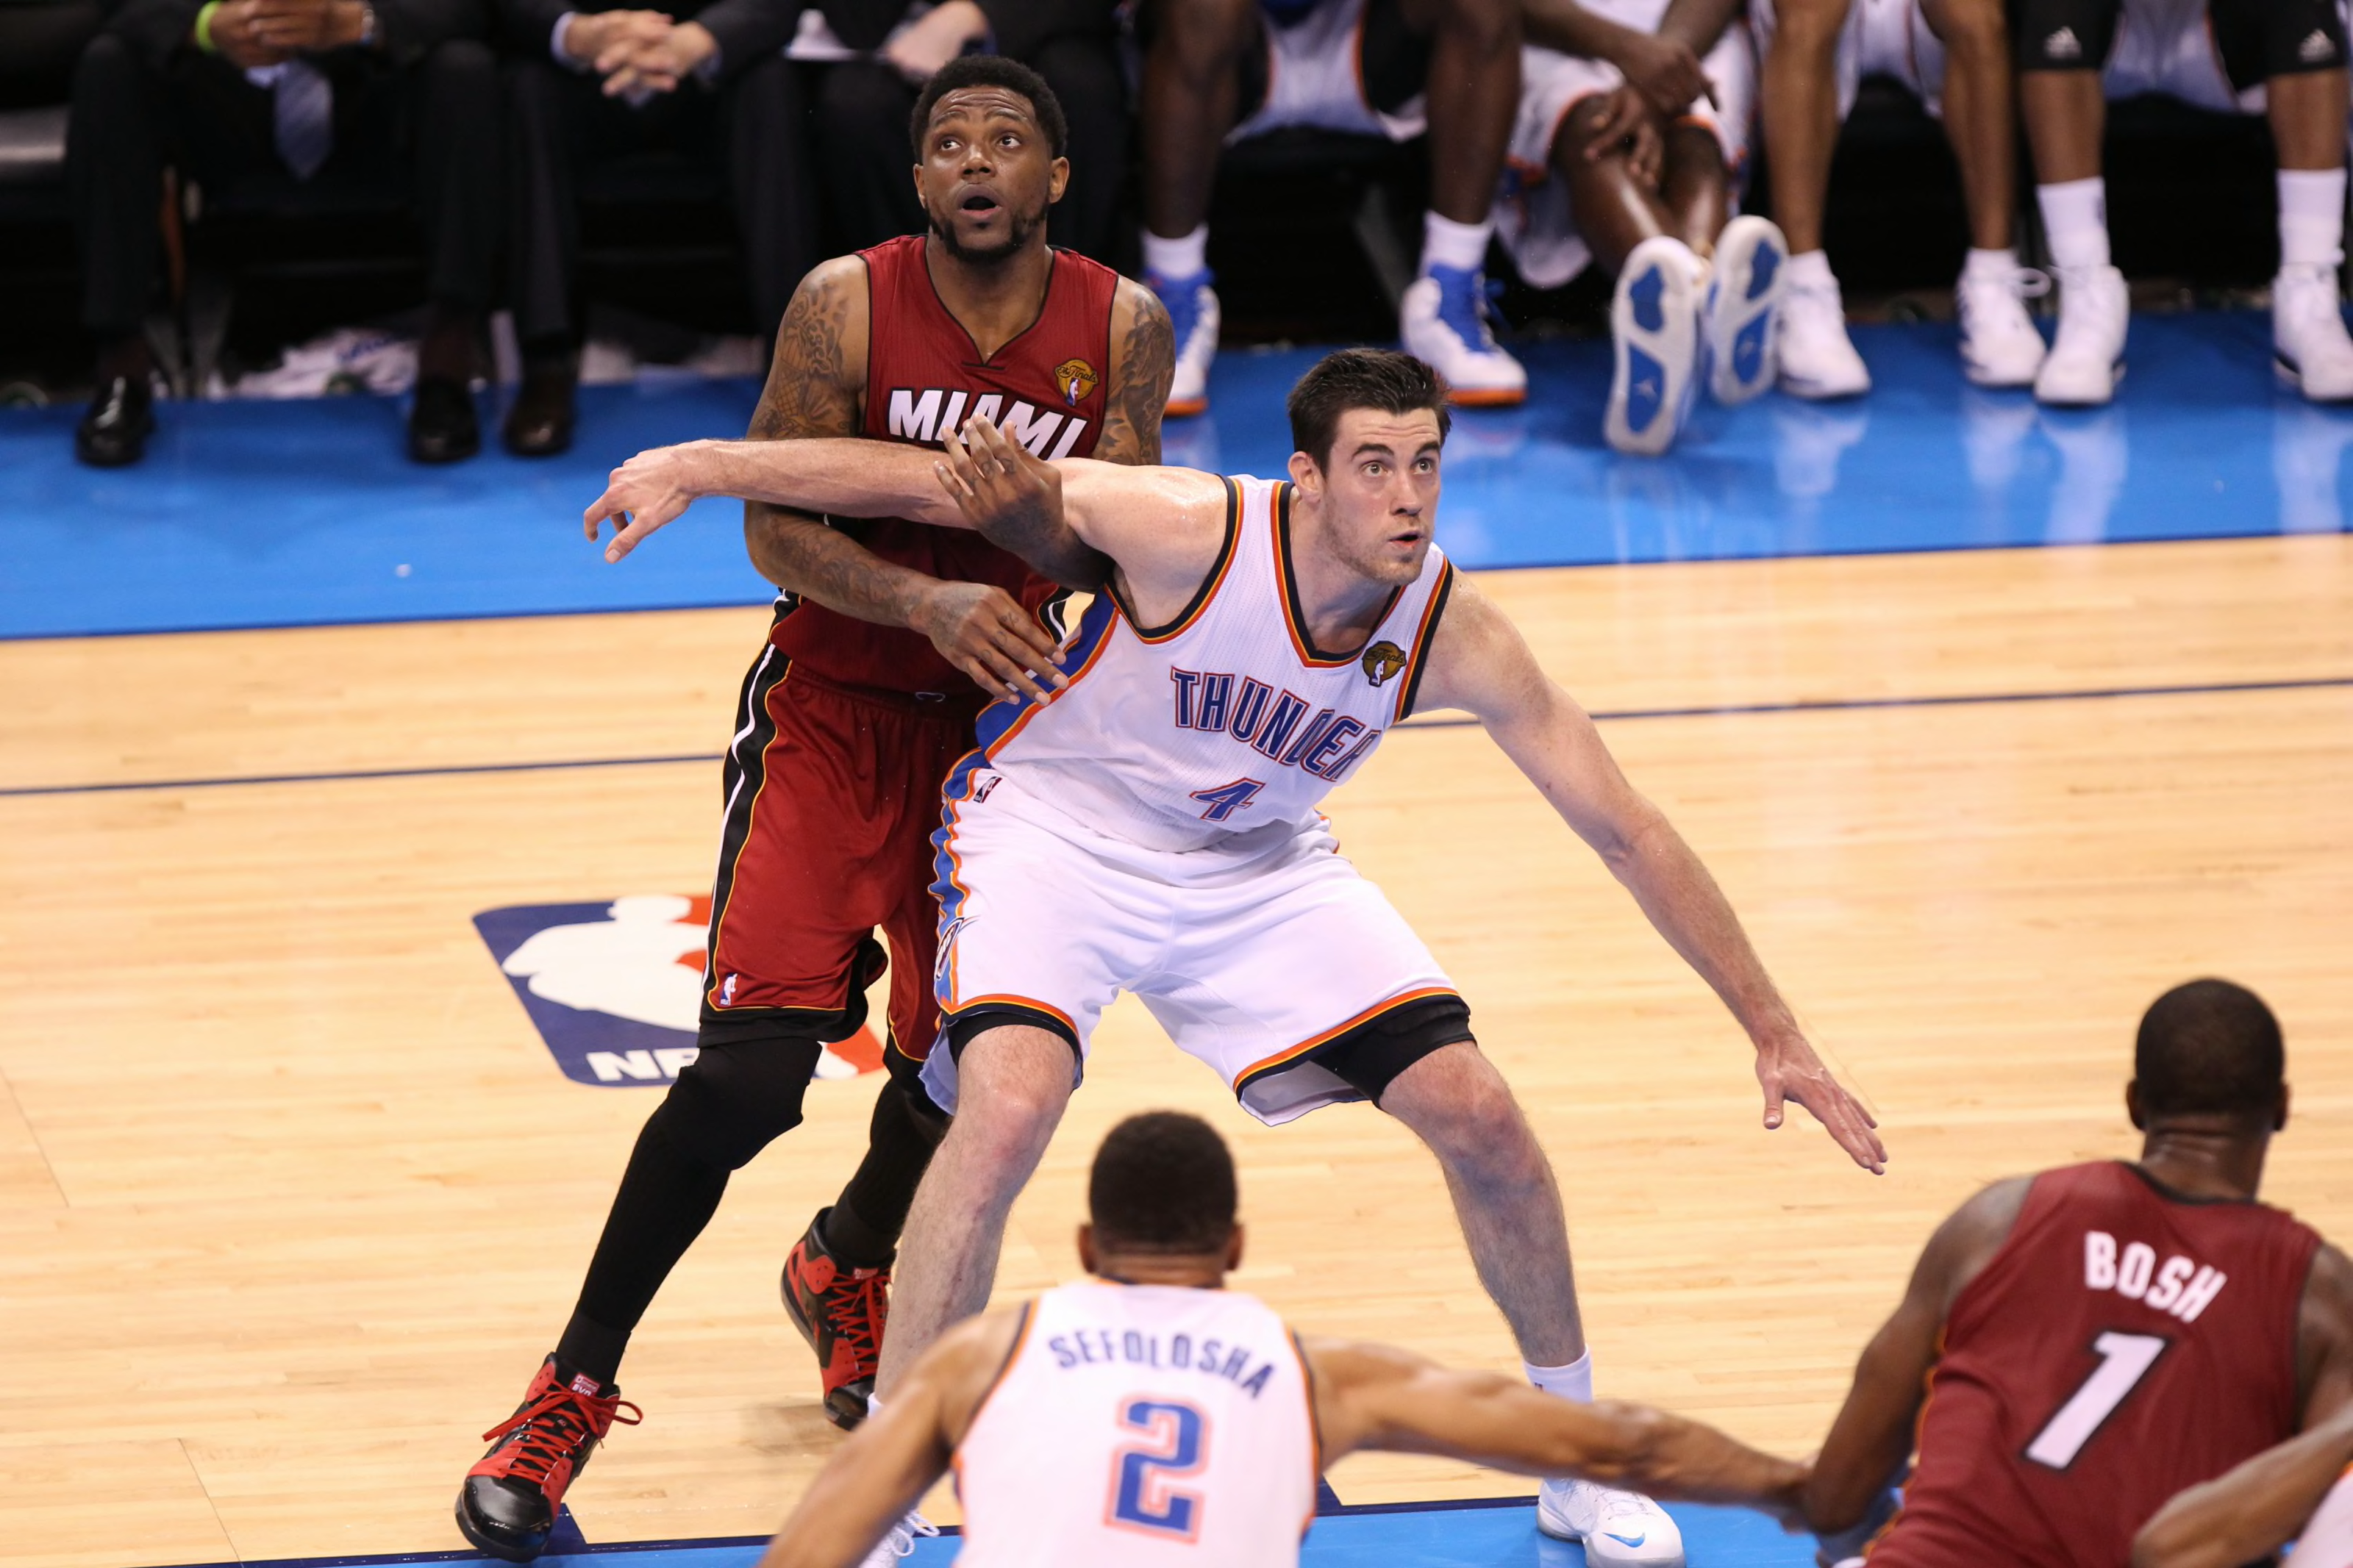 OKC Thunder: Debating whether Nick Collison deserves to have his